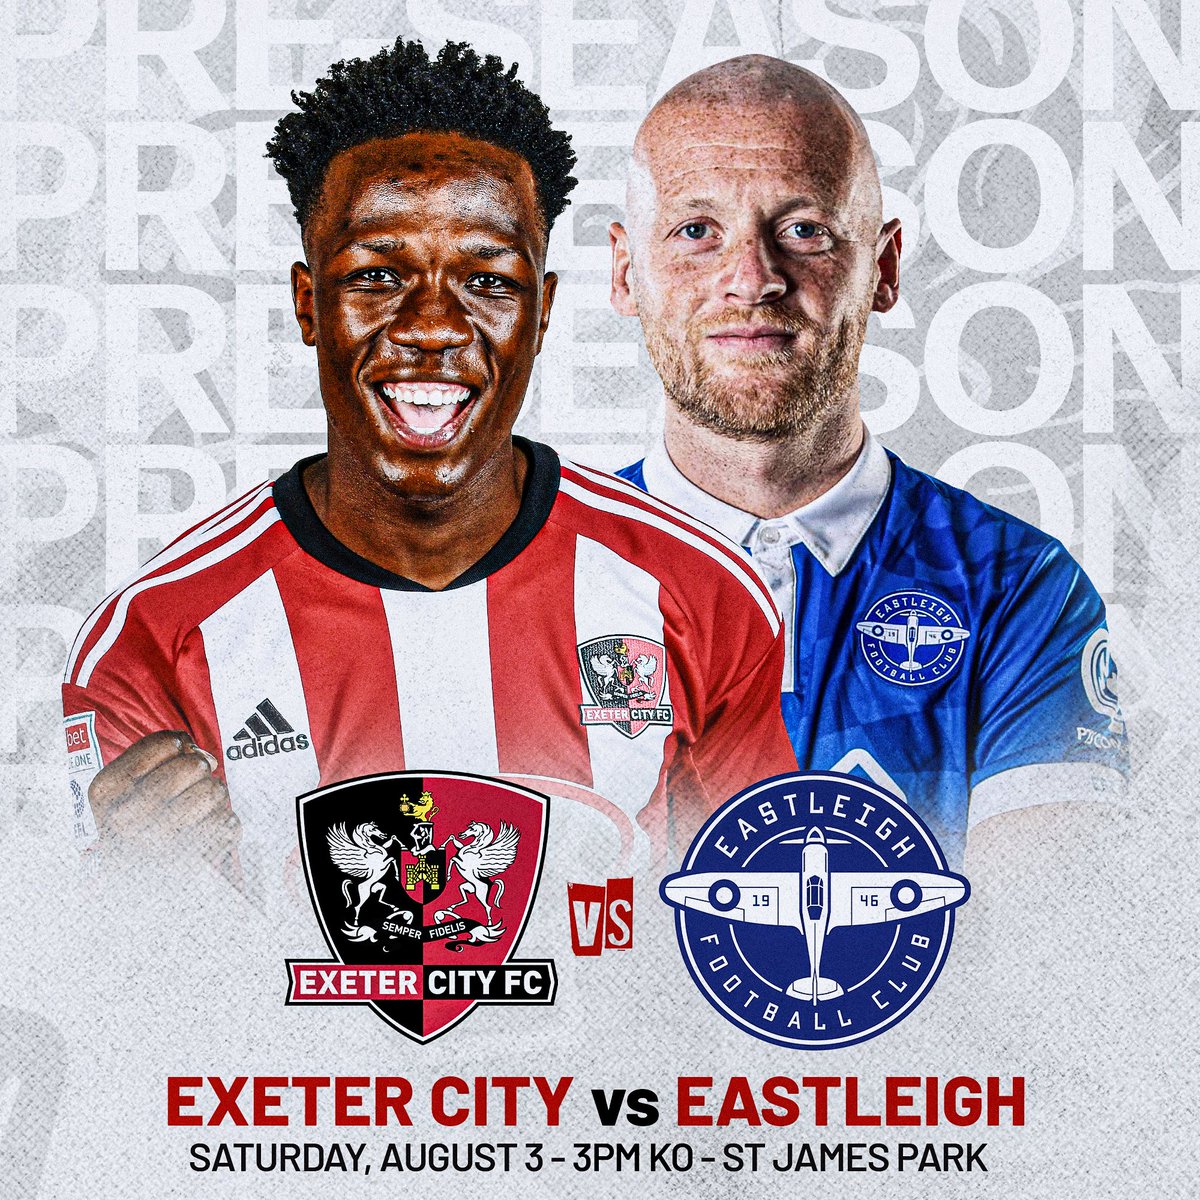 Home friendly confirmed ✅ 

🗓️ City's pre-season schedule will conclude with the visit of @EastleighFC on Saturday, August 3.  

Former skipper @jaketaylor25 will return to SJP and it's a reunion for @_Haarper17 😍

More info ➡️ exetercityfc.co.uk/eastleigh

#ECFC #SemperFidelis